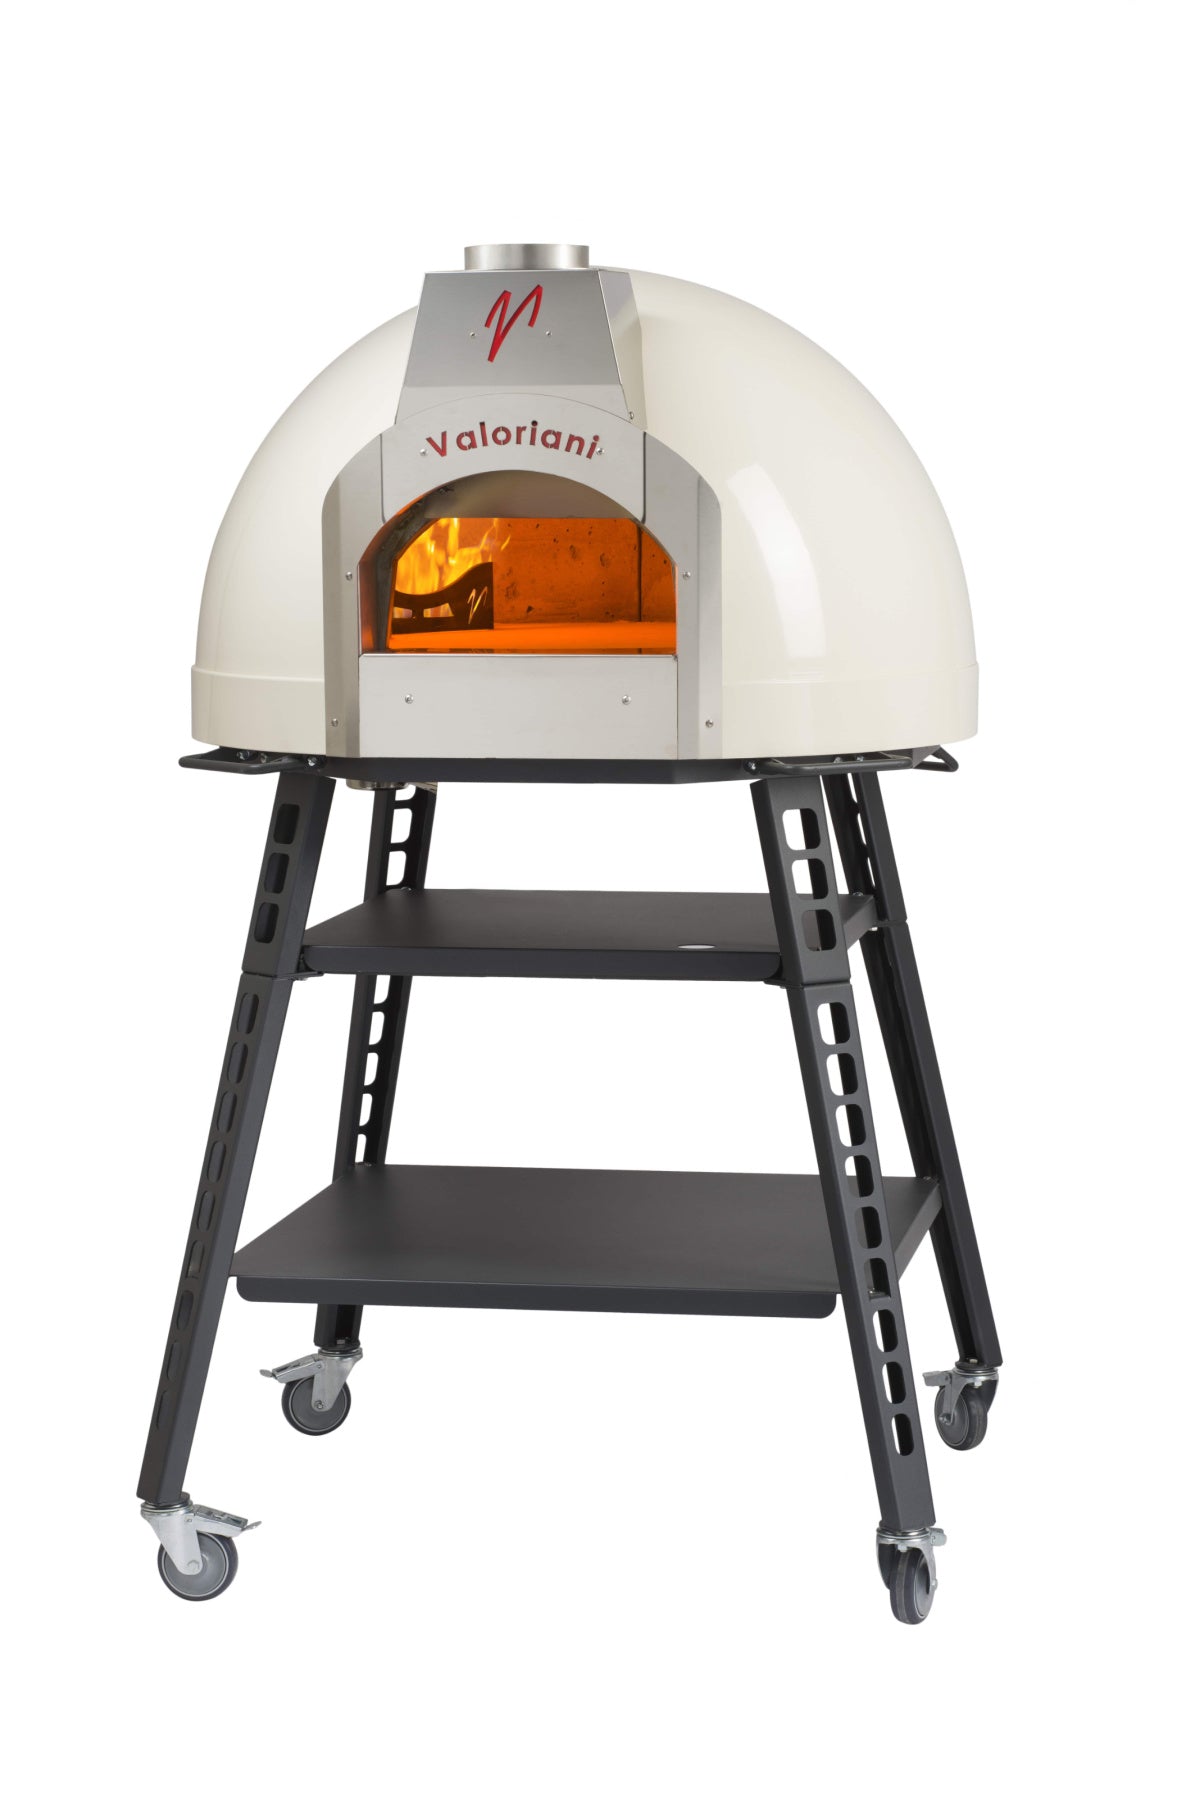 Valoriani Baby 75 Wood Fired Pizza Oven